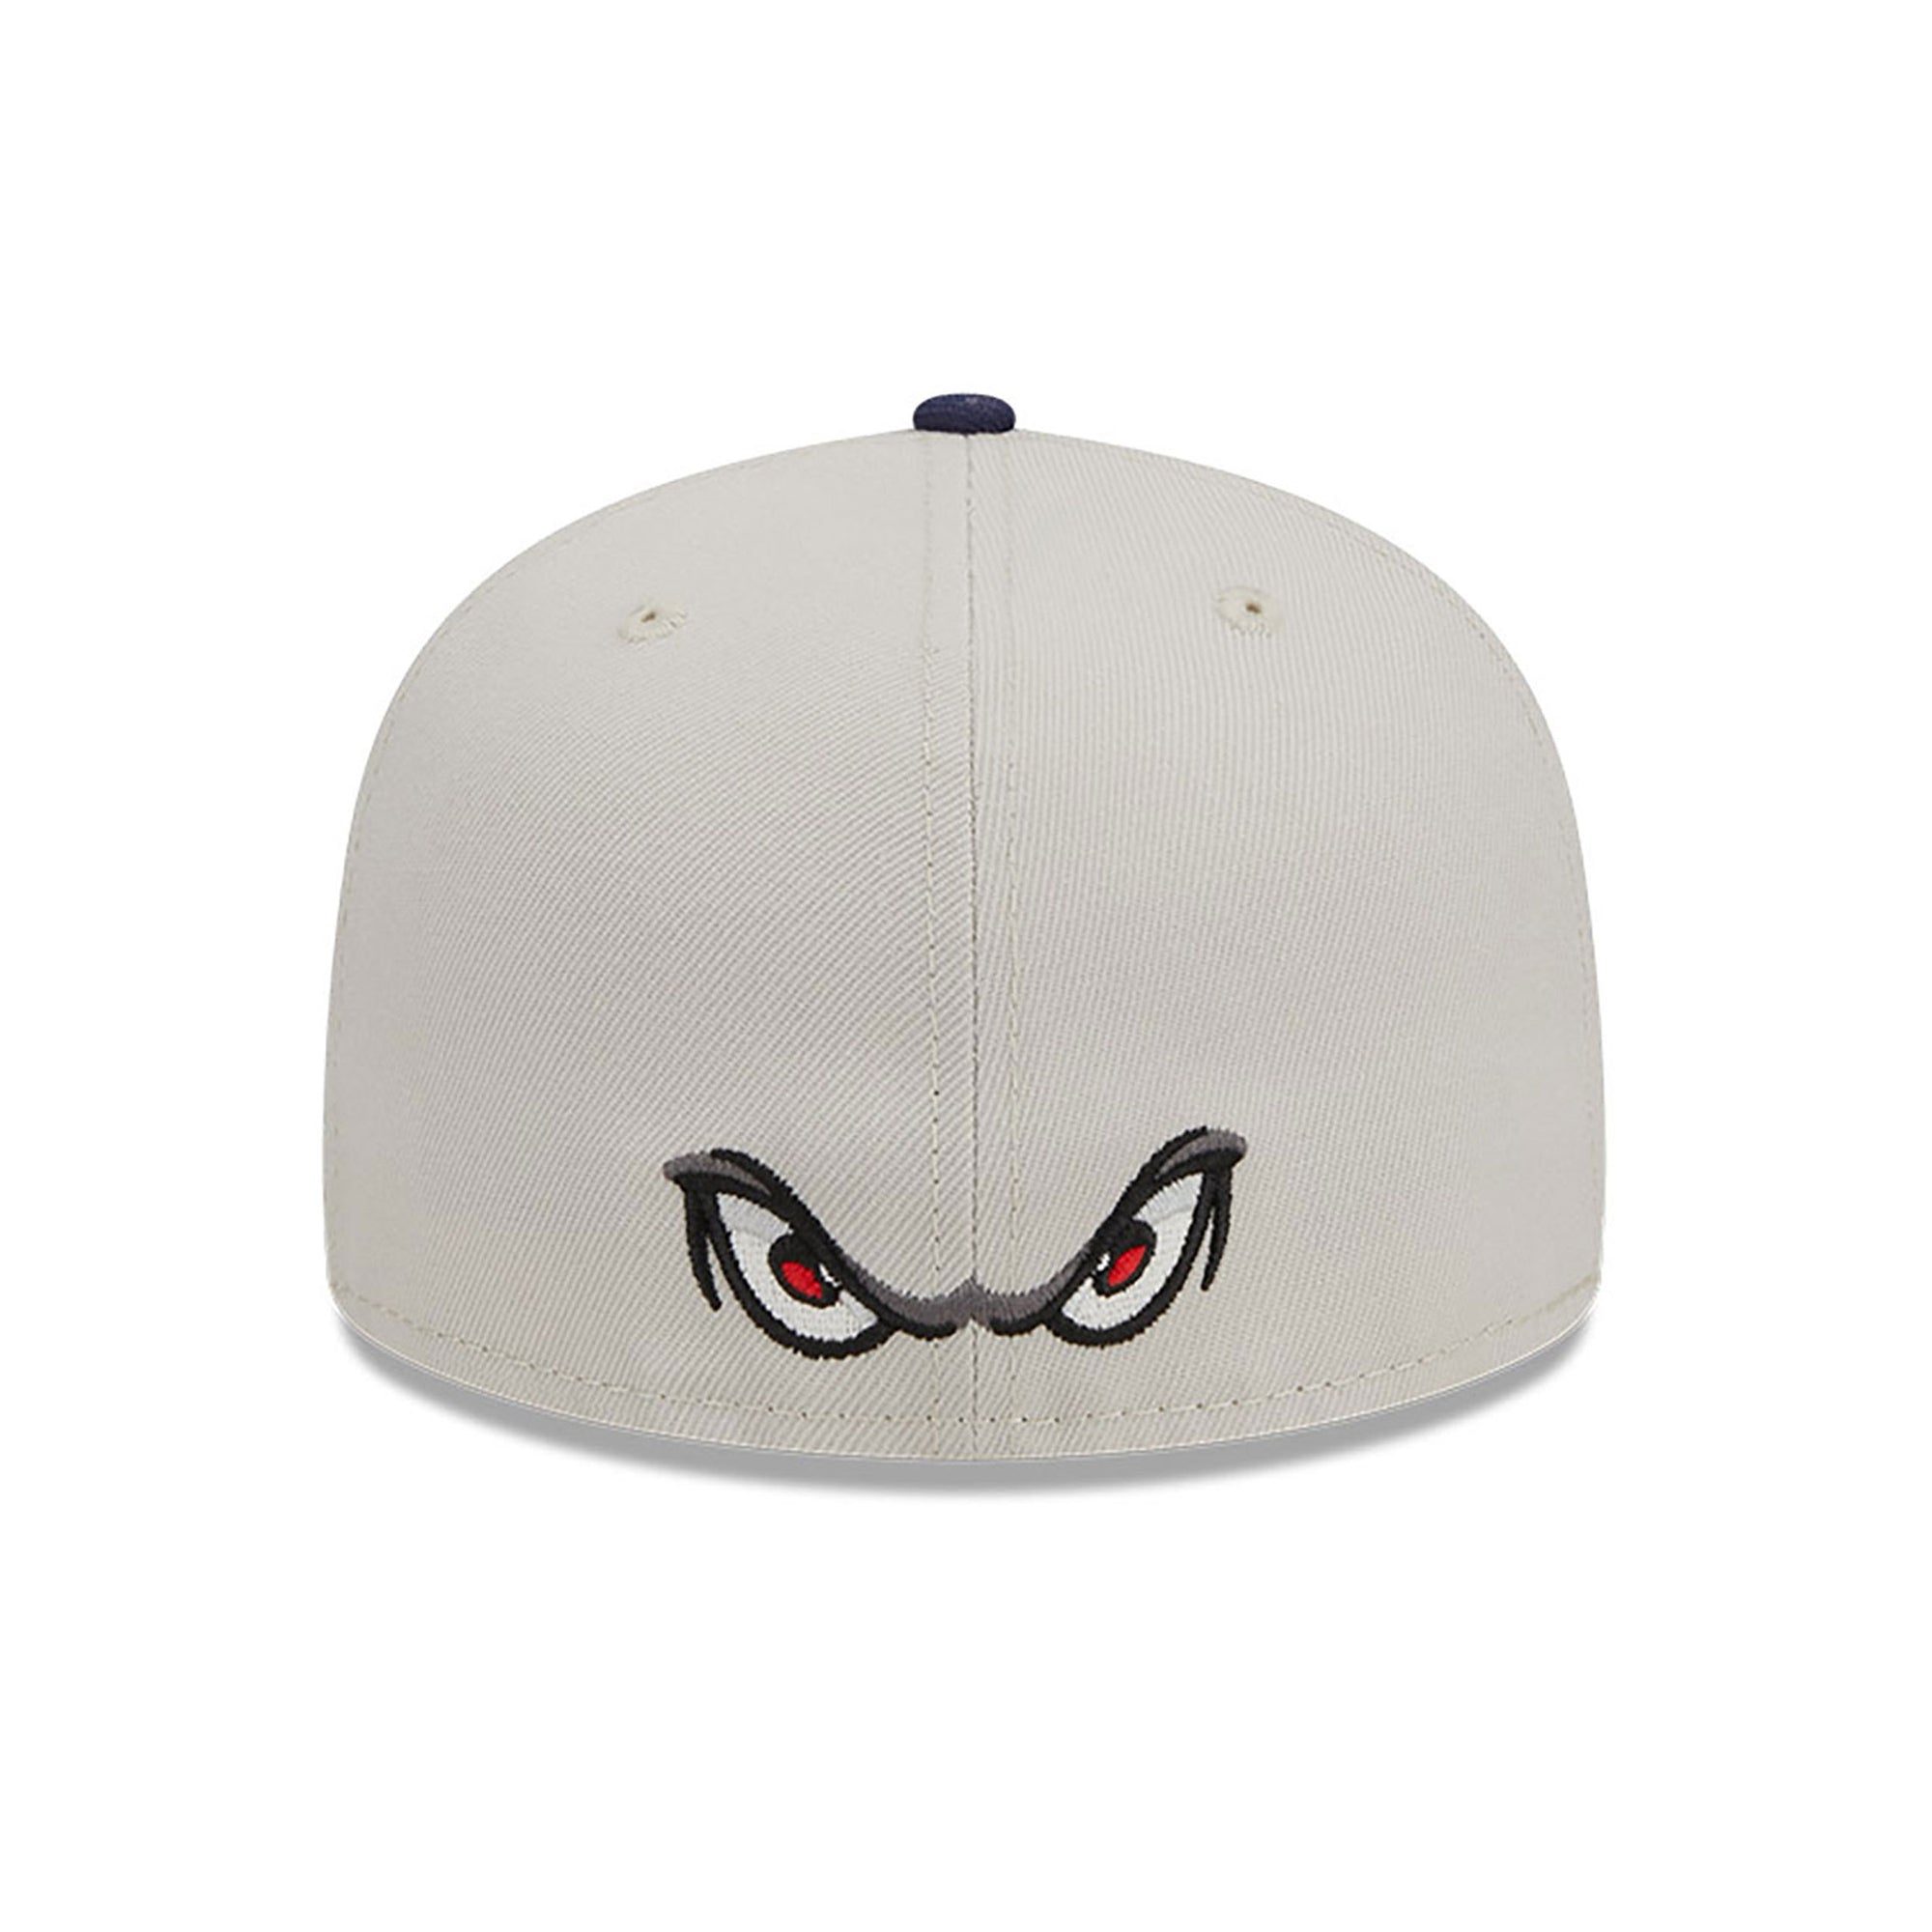 Hat 59FIFTY Team Farm Padres Fitted Diego - SoleFly San